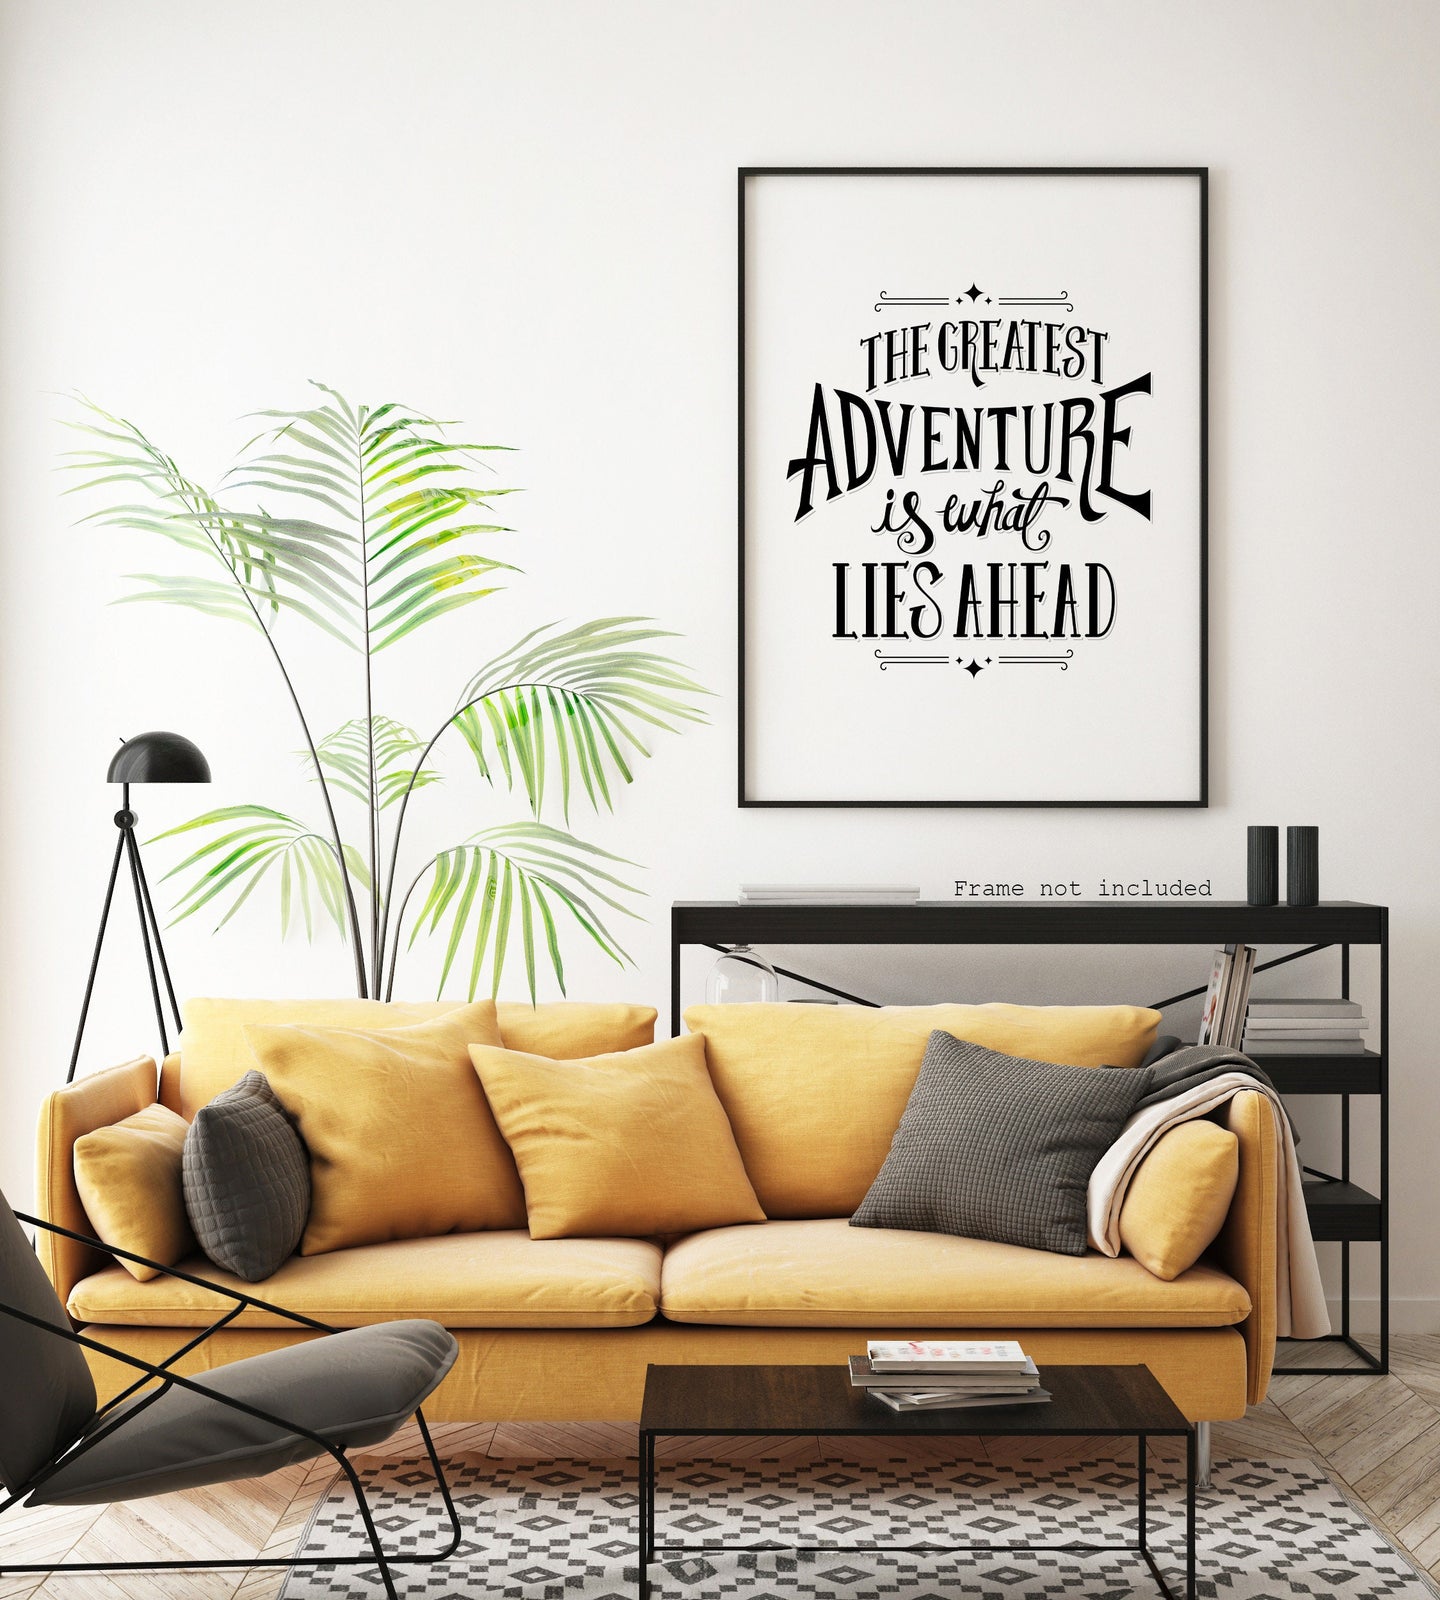 The Greatest Adventure is What Lies Ahead - UNFRAMED Travel Poster for Home - Black and White Travel wall art - Adventure wall art